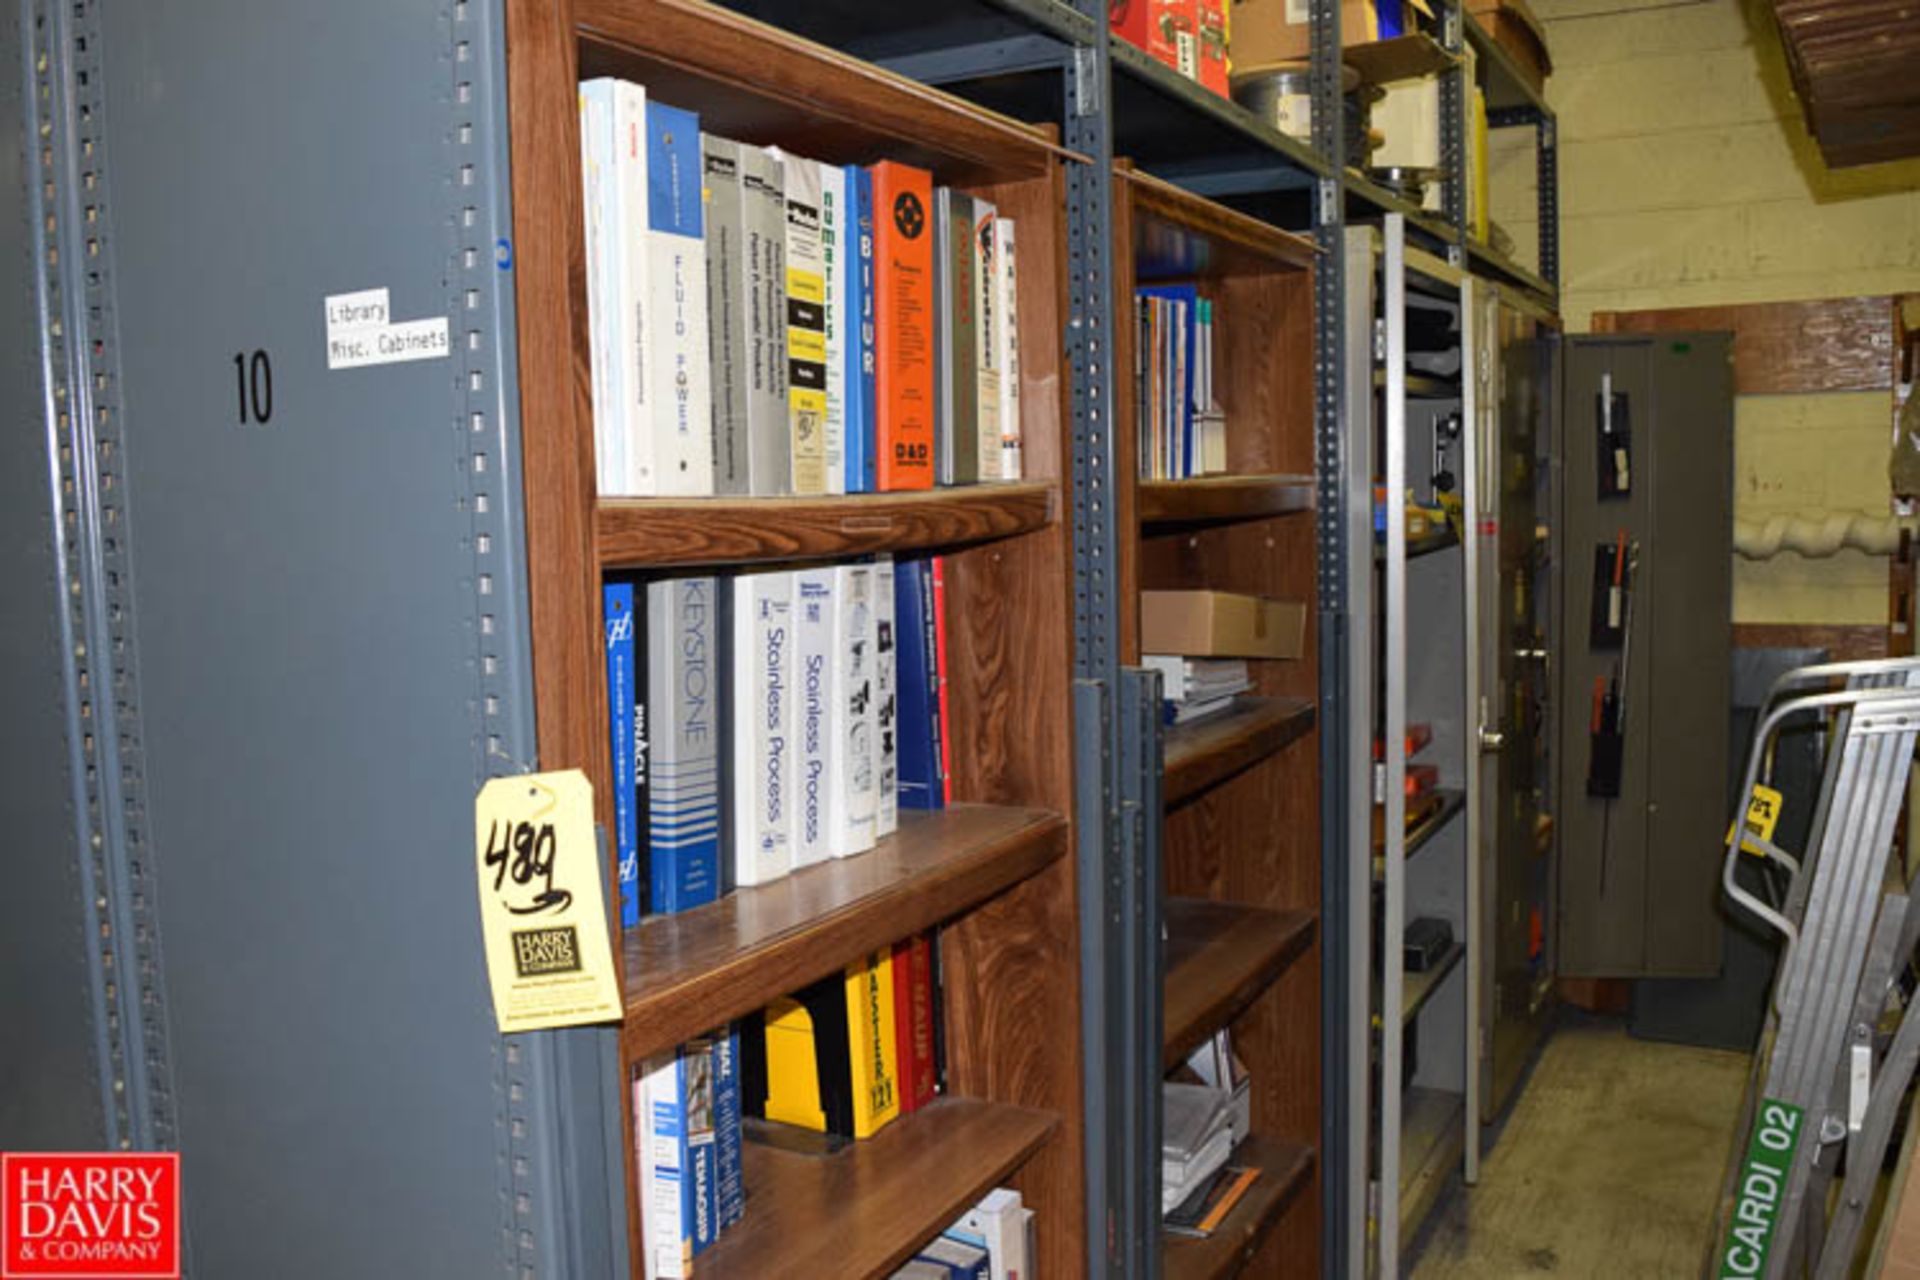 Hardware Tool Boxes, Chain Hoist, ETC with Shelf - Rigging Fee $ 439.5